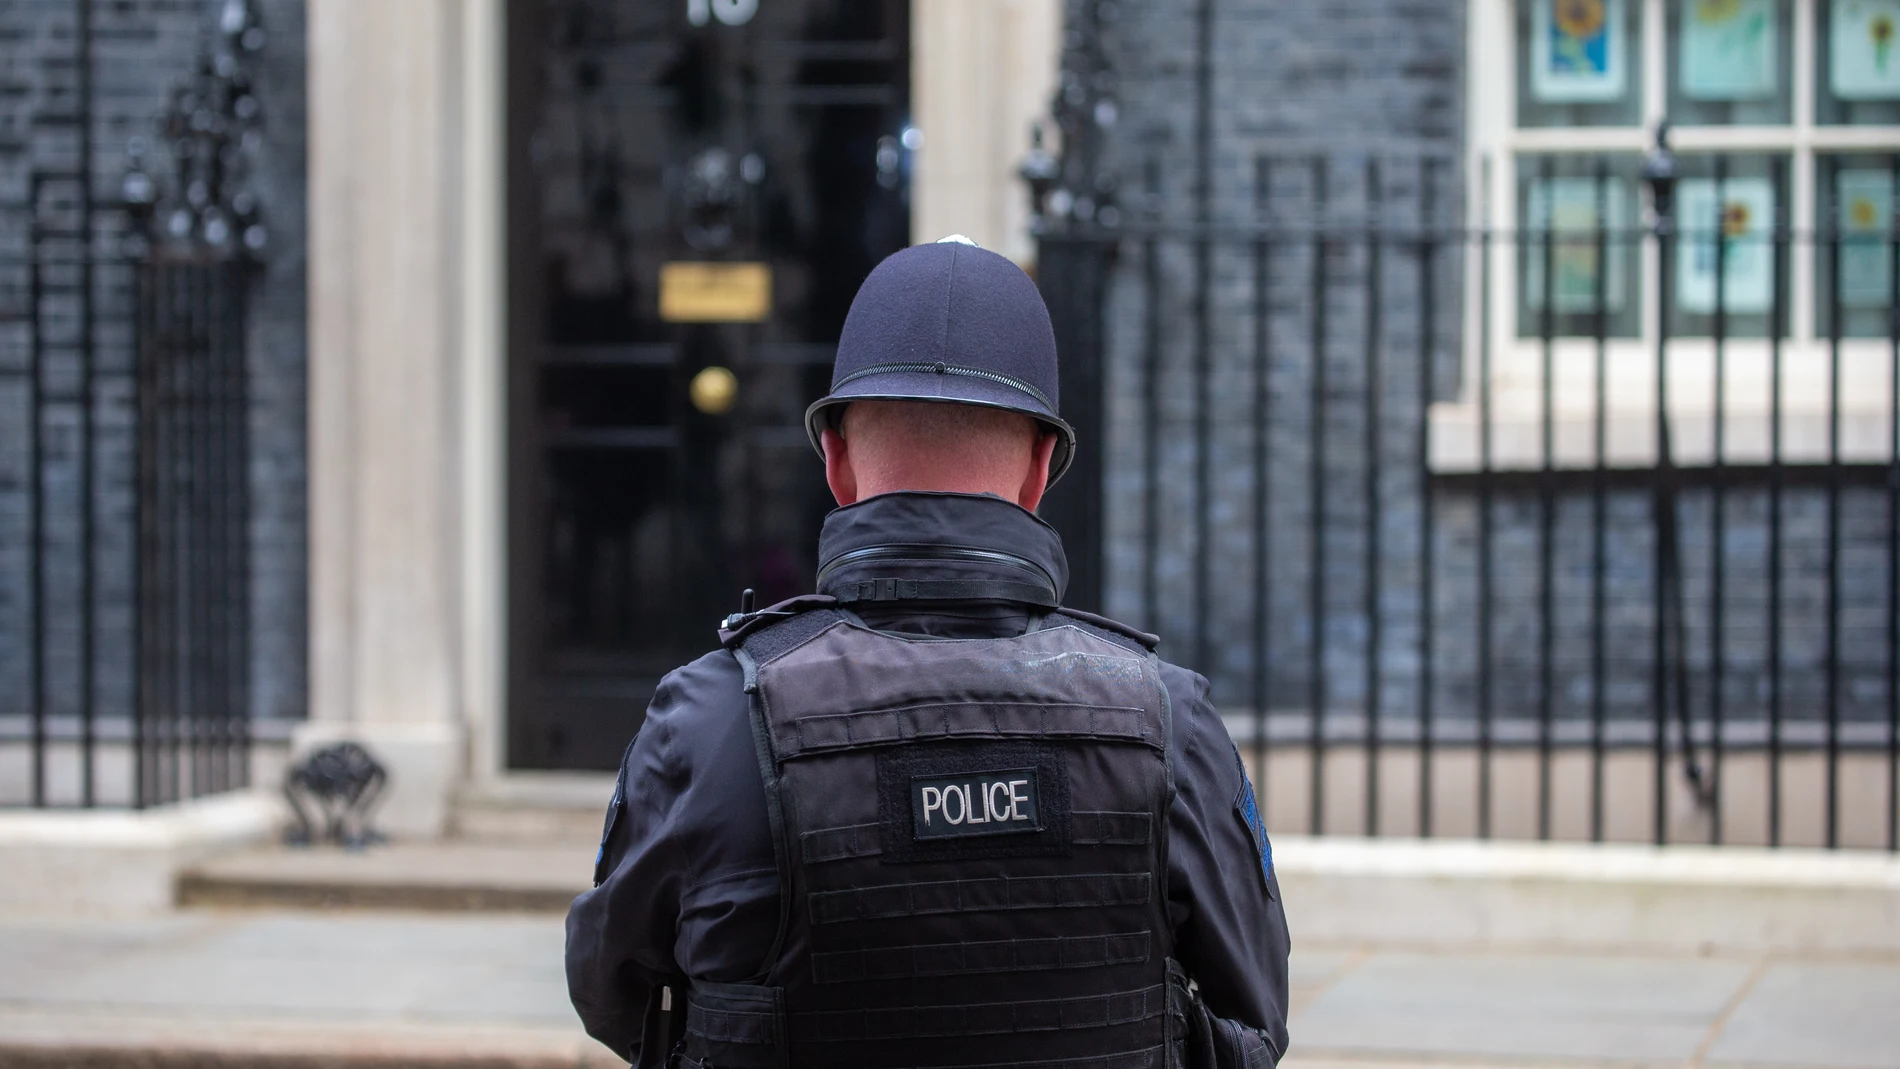 April 19, 2022, London, England, United Kingdom: A police officer stands outside 10 Downing Street as UK Prime Minister Boris Johnson faces parliament for misleading MPs on party gate. (Foto de ARCHIVO) 19/04/2022